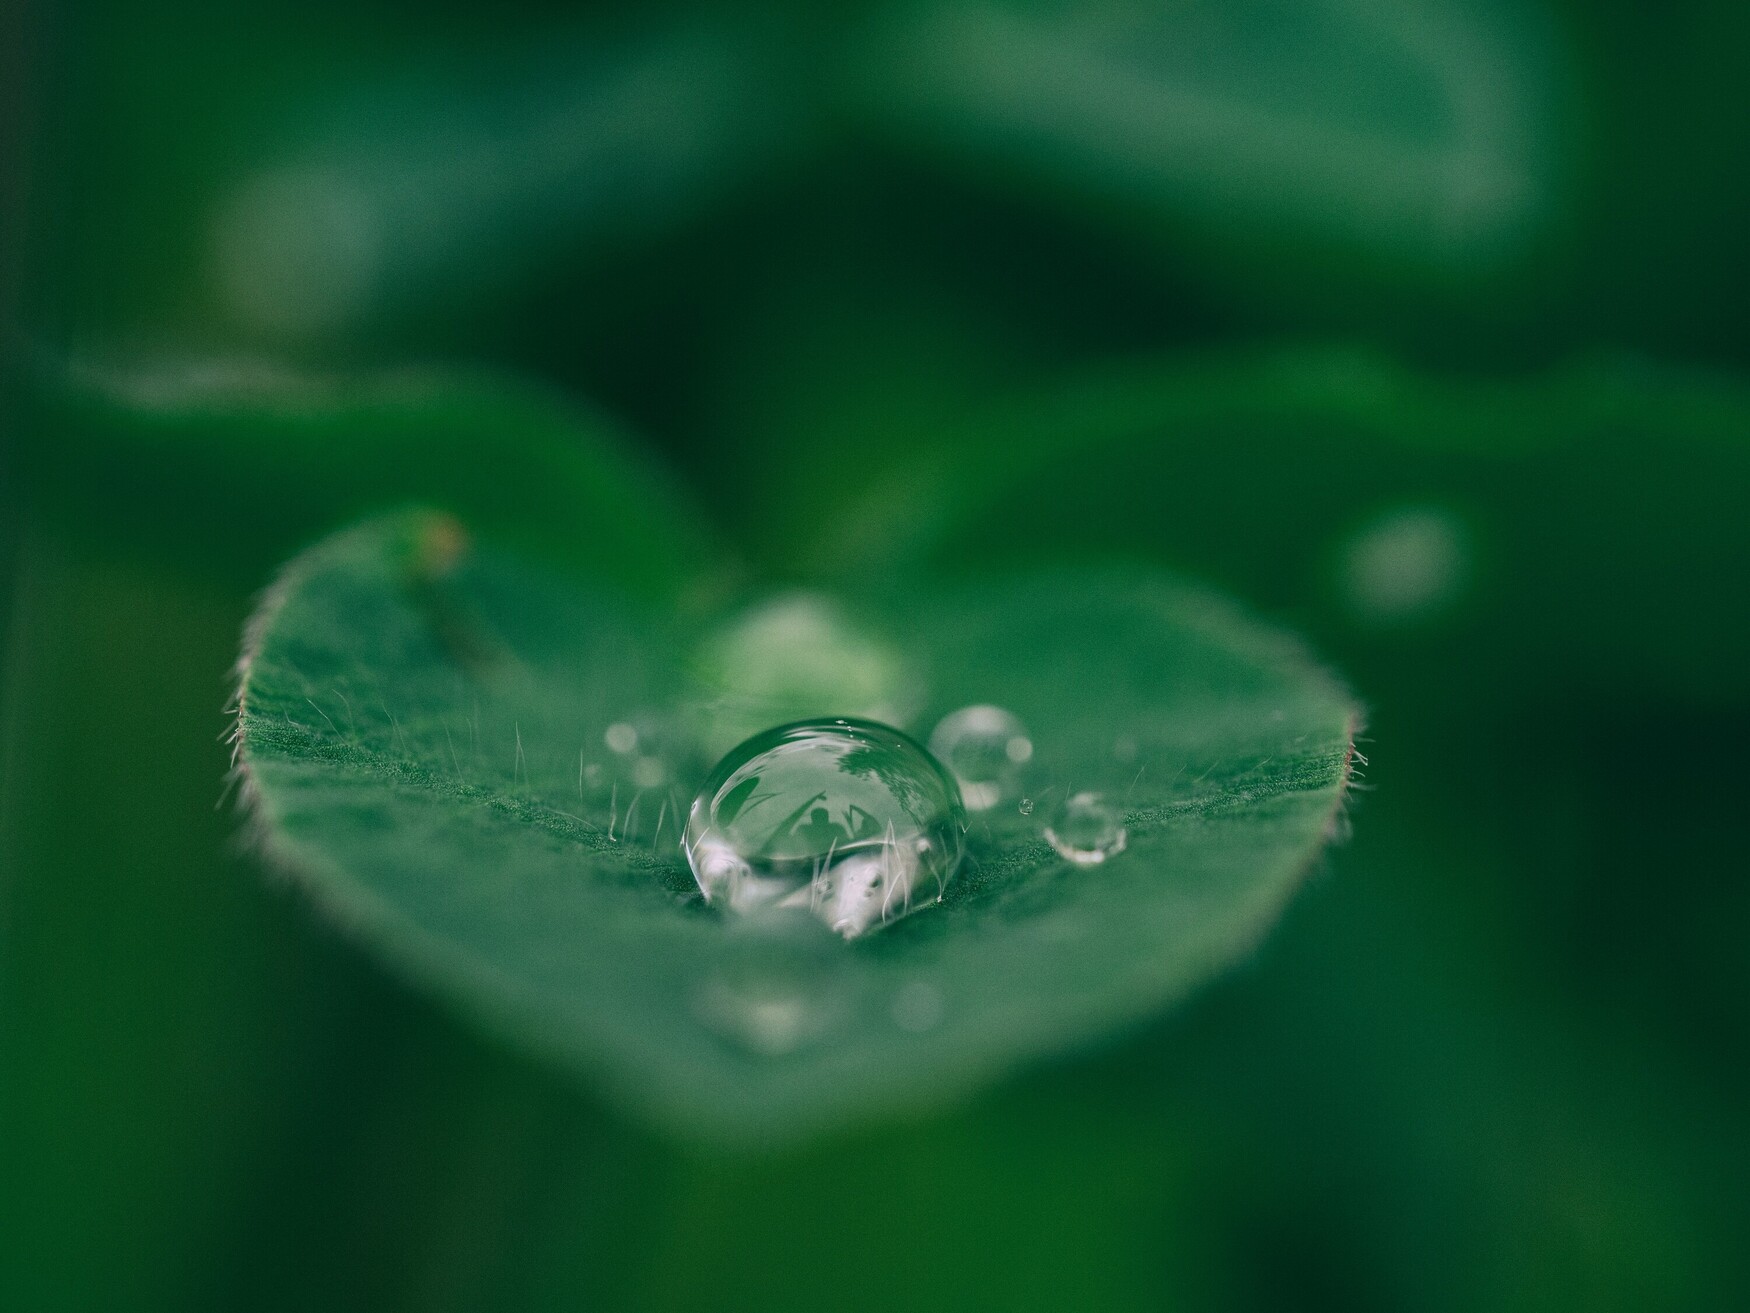 A drop of water sits on a leaf